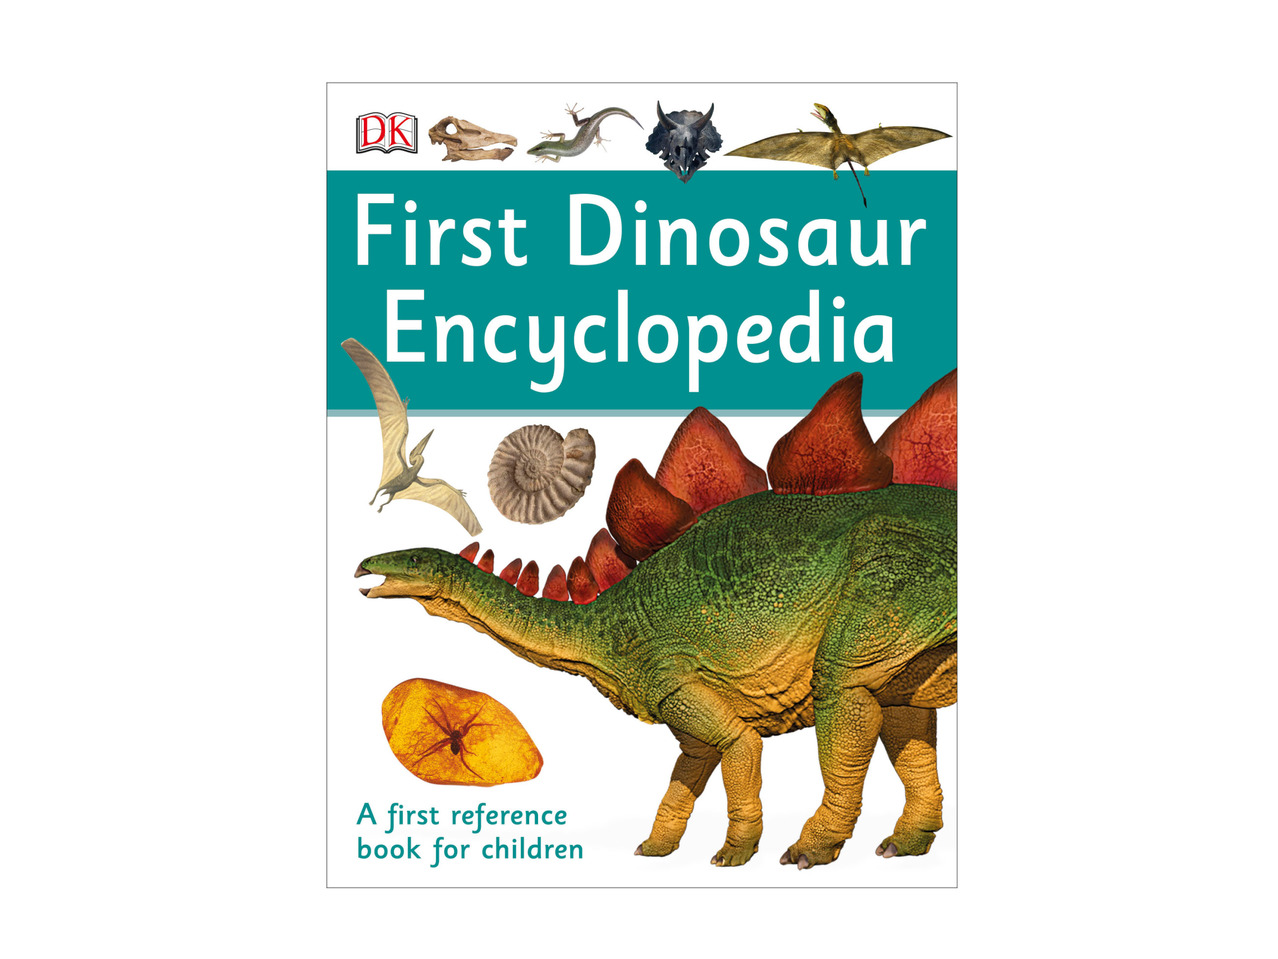 DK First Encyclopedia or Children's Dictionary1